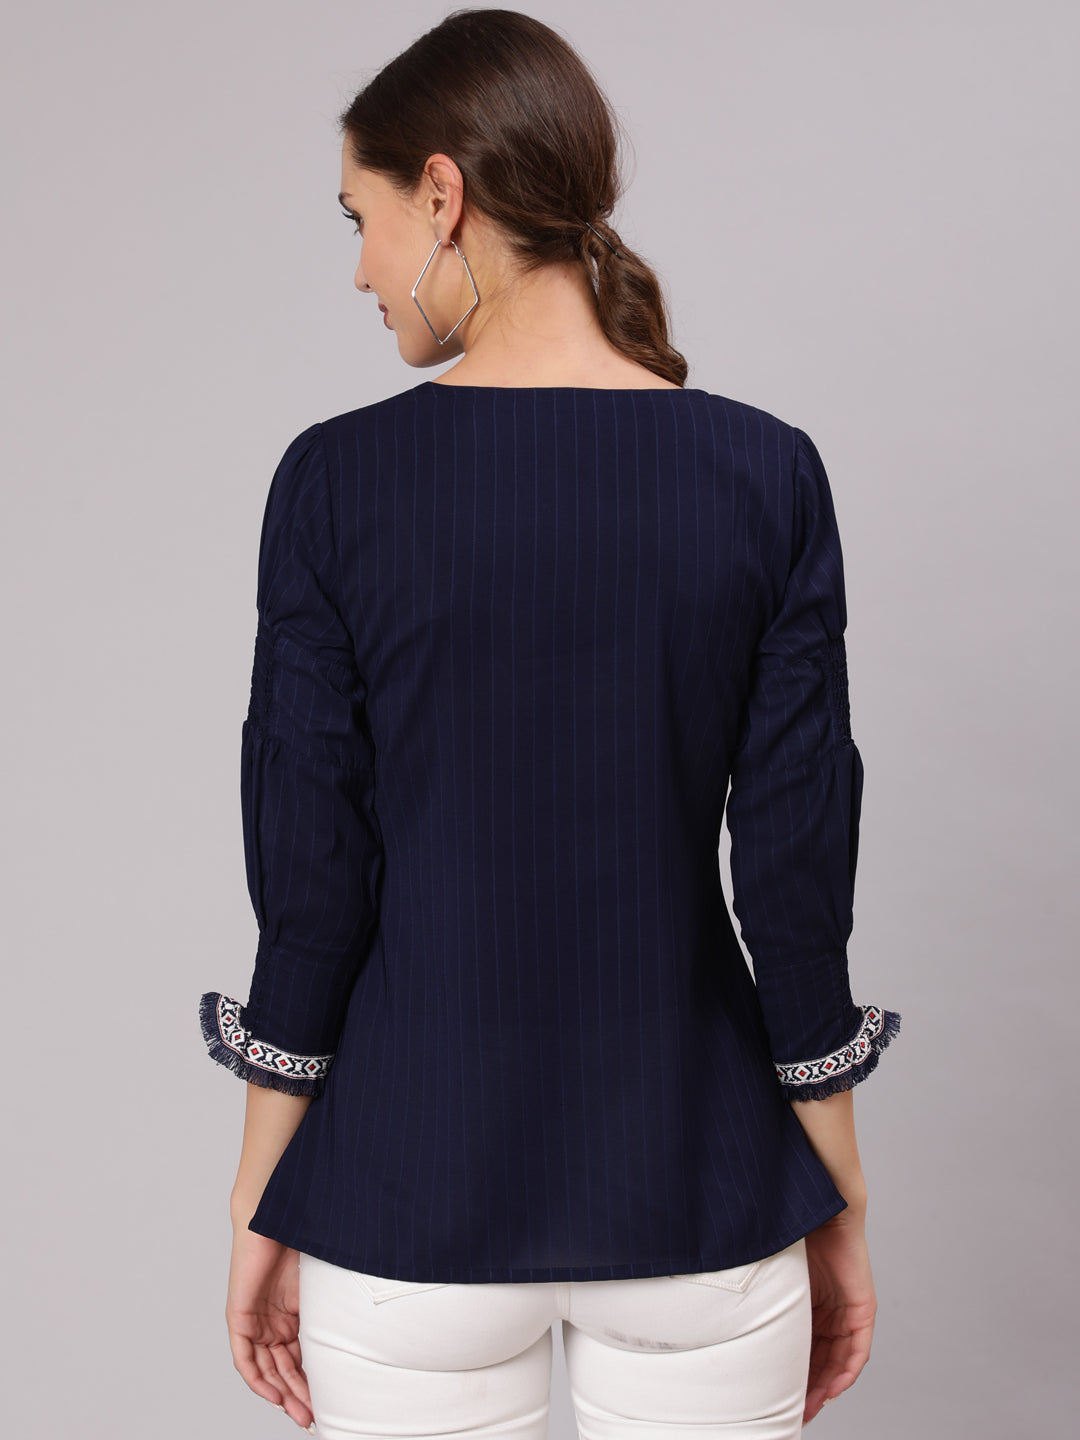 A Blue Poly Silk Lace Embellished Top With Smocked Sleeves